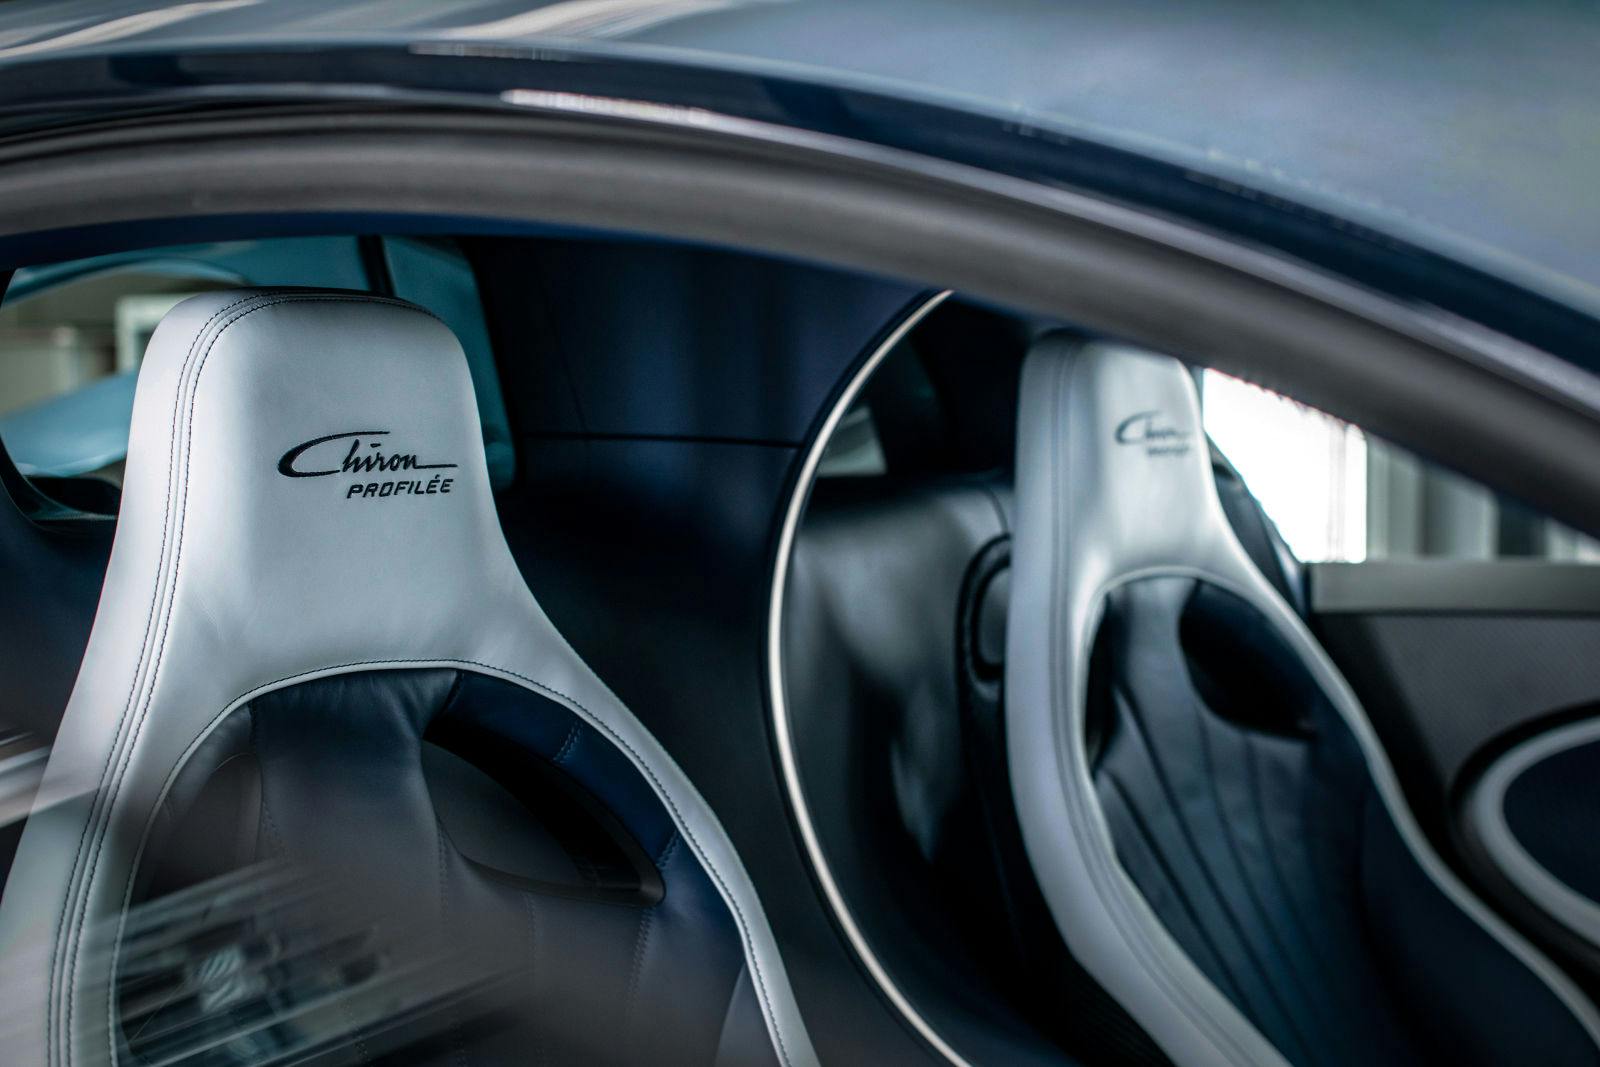 The Profilée is equipped with comfort seats finished in Gris Rafale and Deep Blue leather.